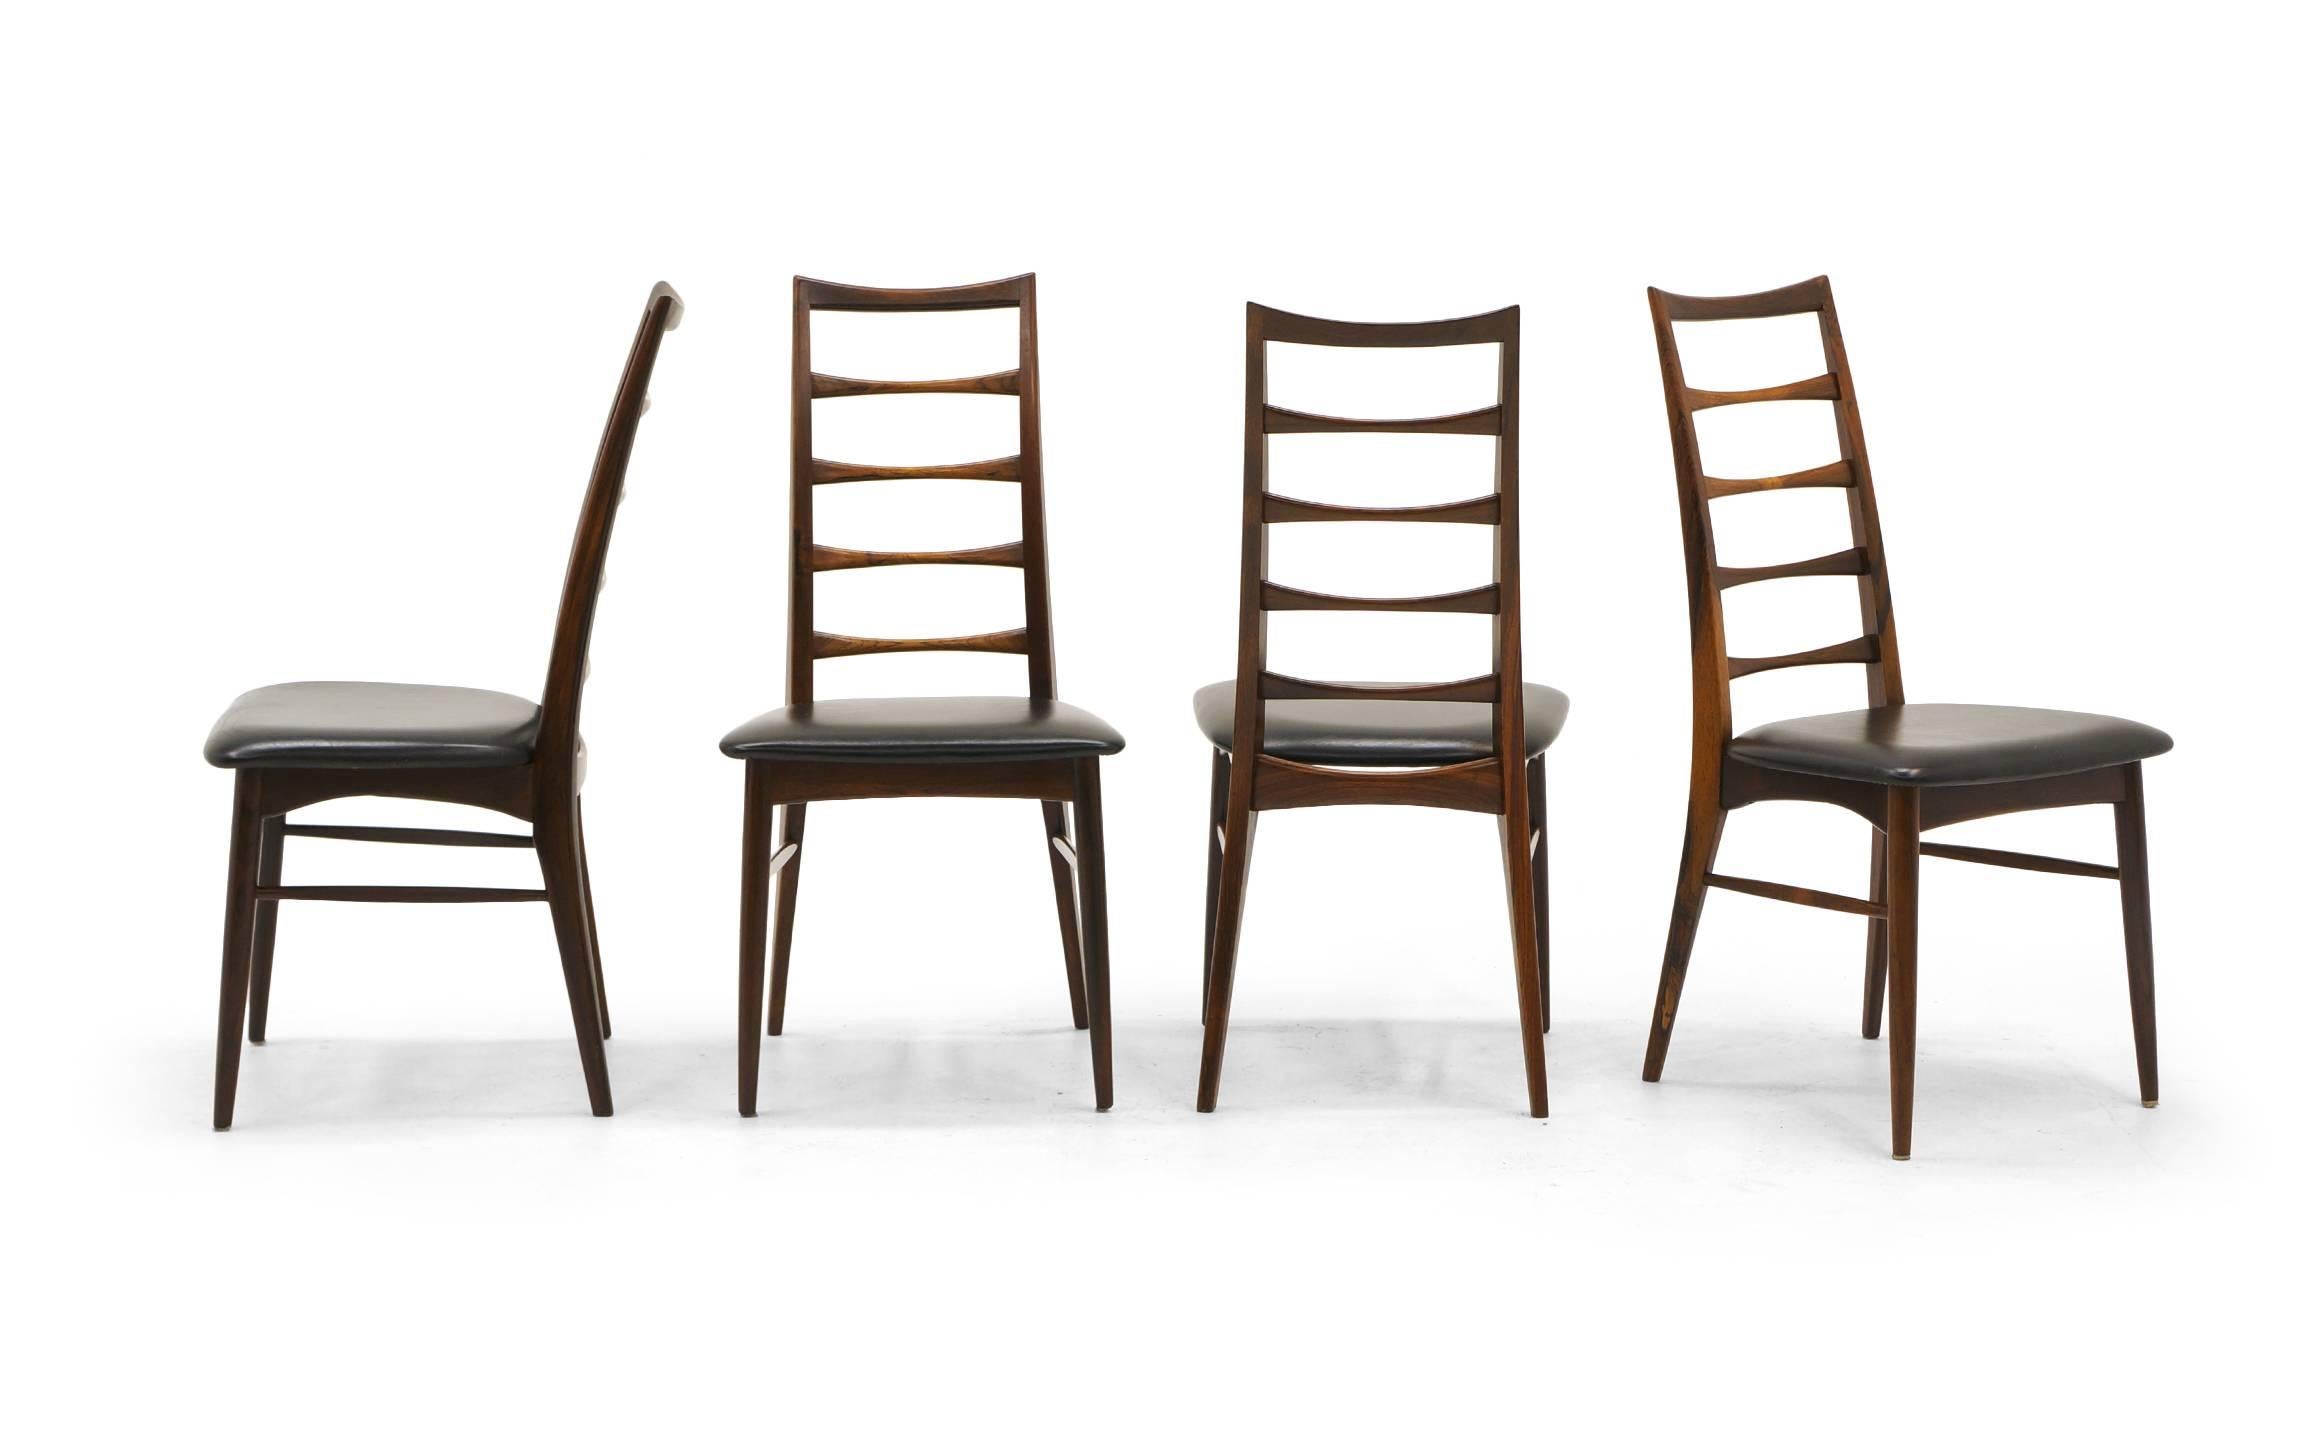 Mid-20th Century 6 Rosewood Lis Dining Chairs by Niels Kofoed, Two with arms, Four armless